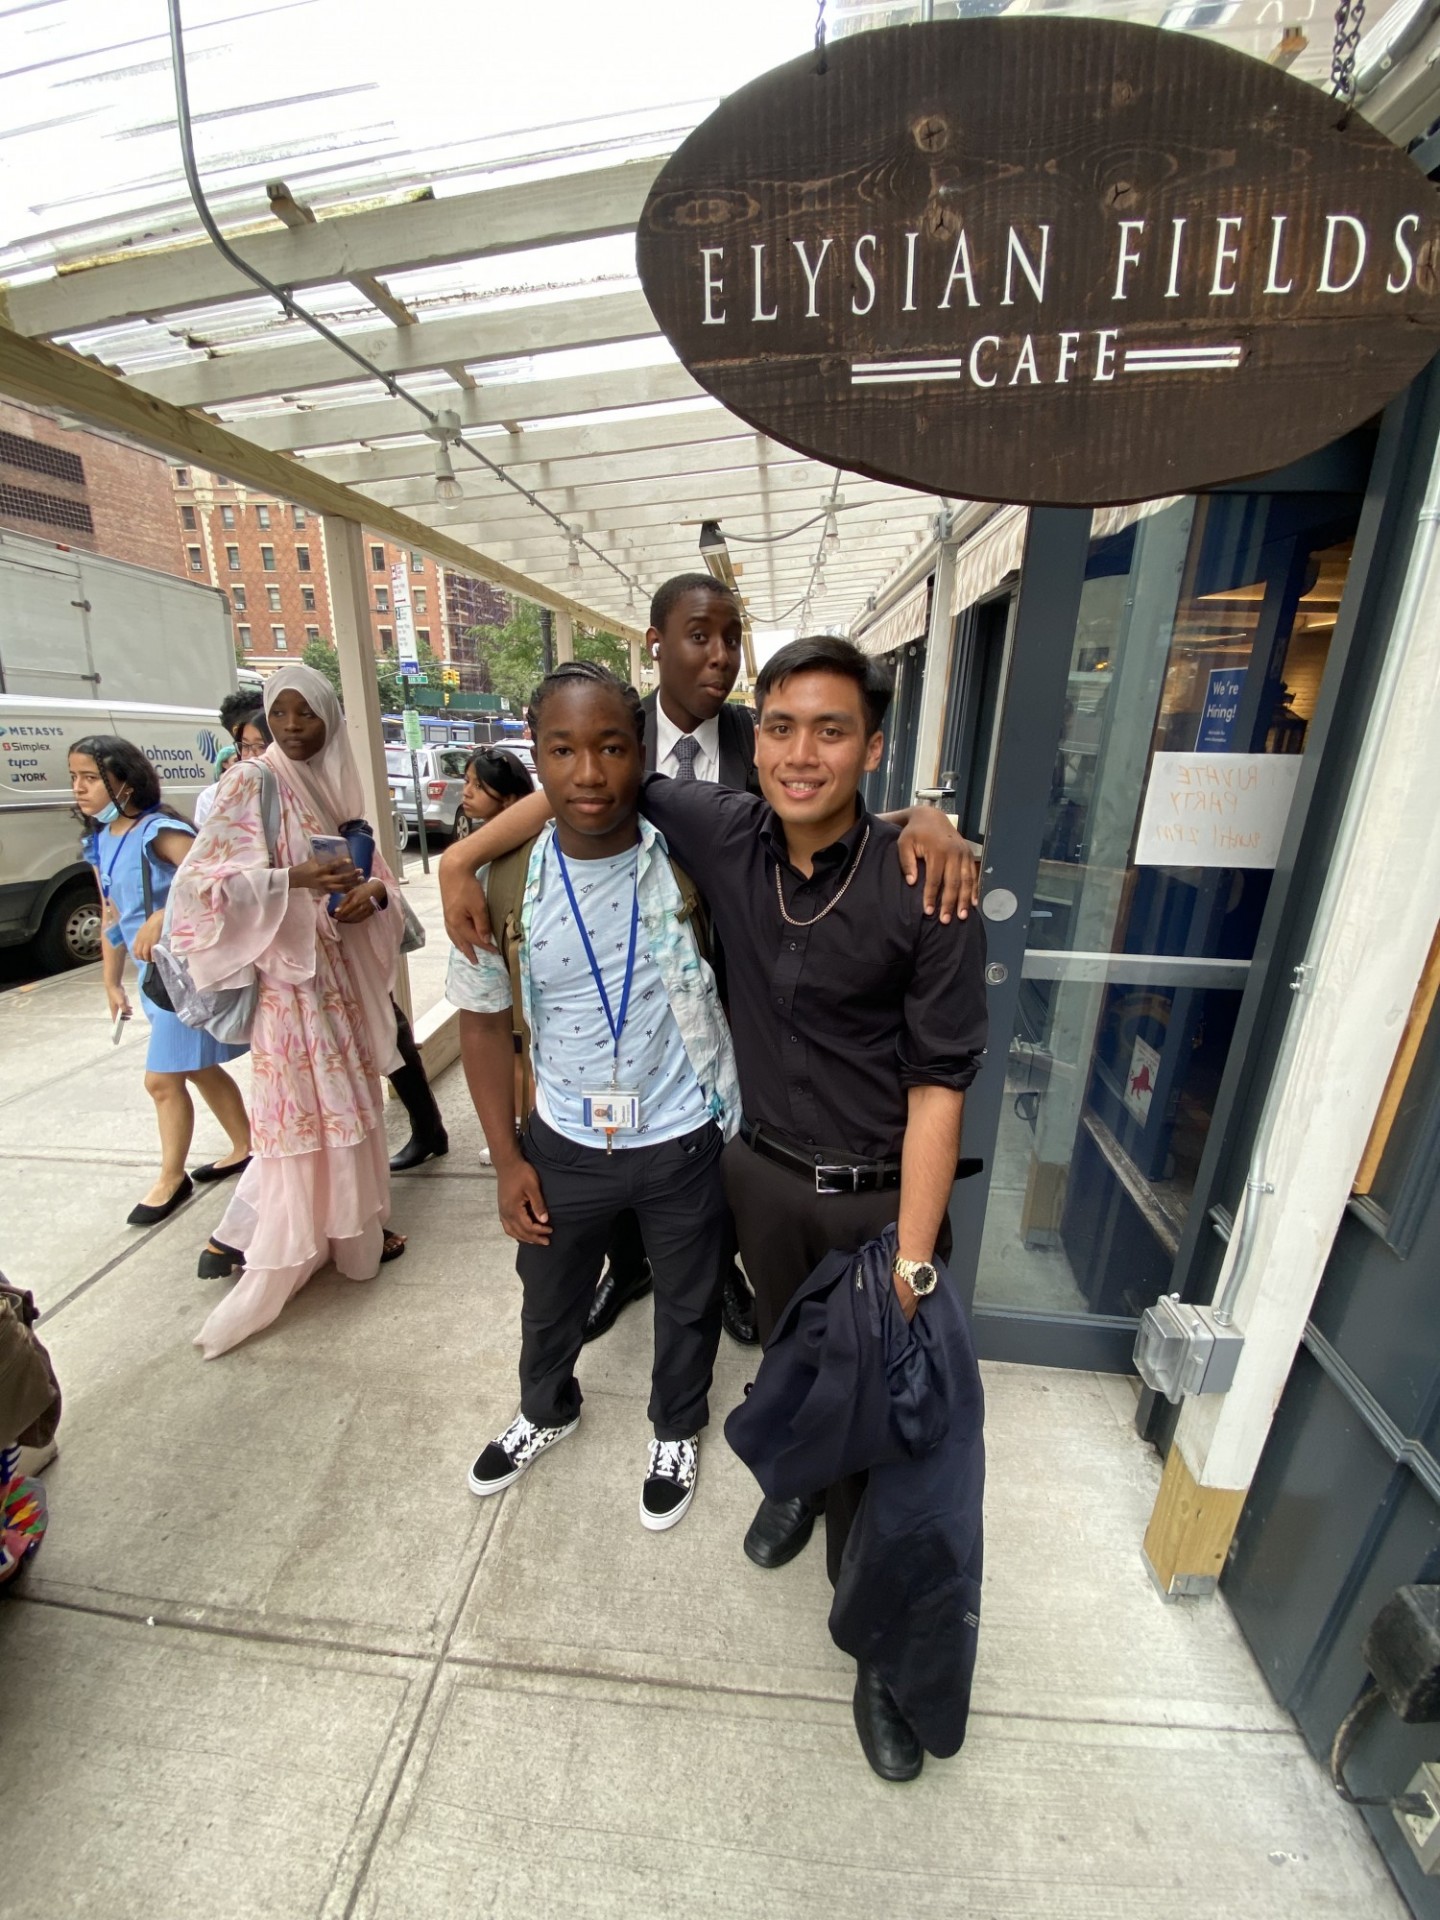 Abel and Student in Freedom and Citizenship Program stand outside elysian fields cafe